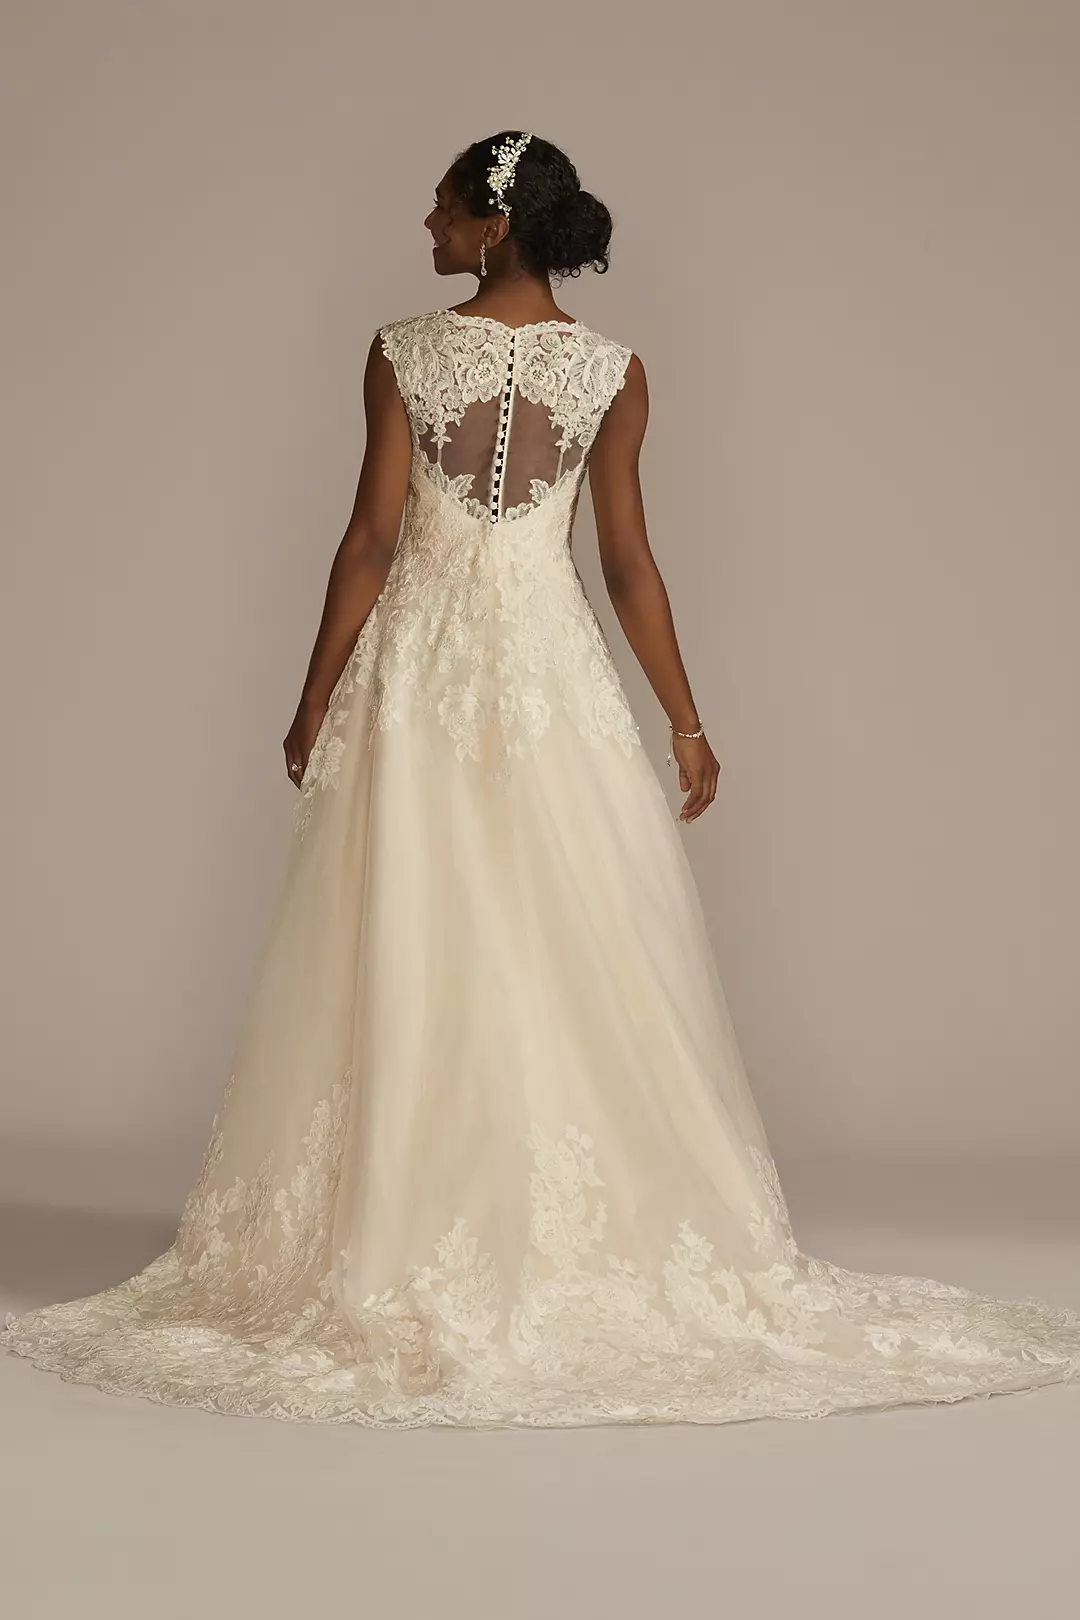 Scalloped Lace and Tulle Wedding Dress Image 2